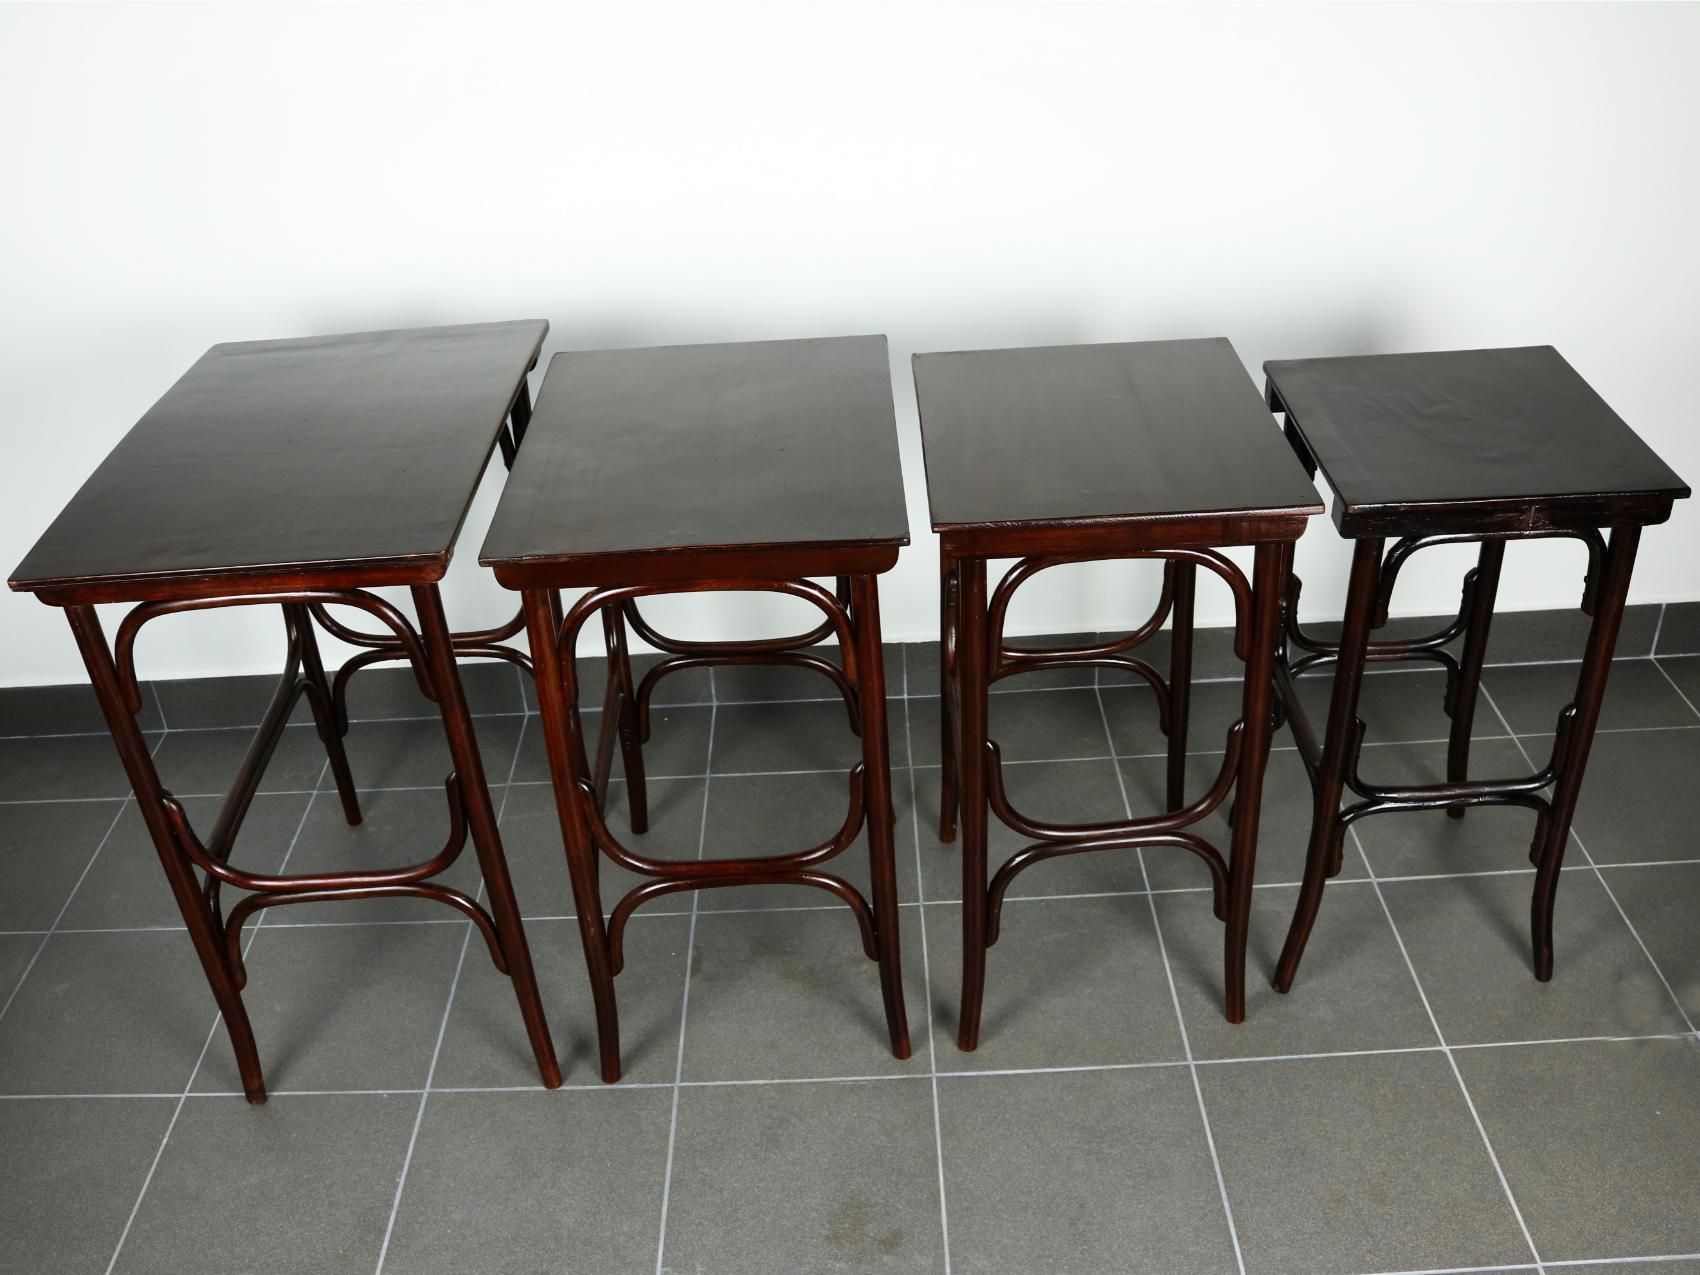 Vienna Secession Set of Four Pieces Nesting Tables No.10 by Thonet, circa 1900